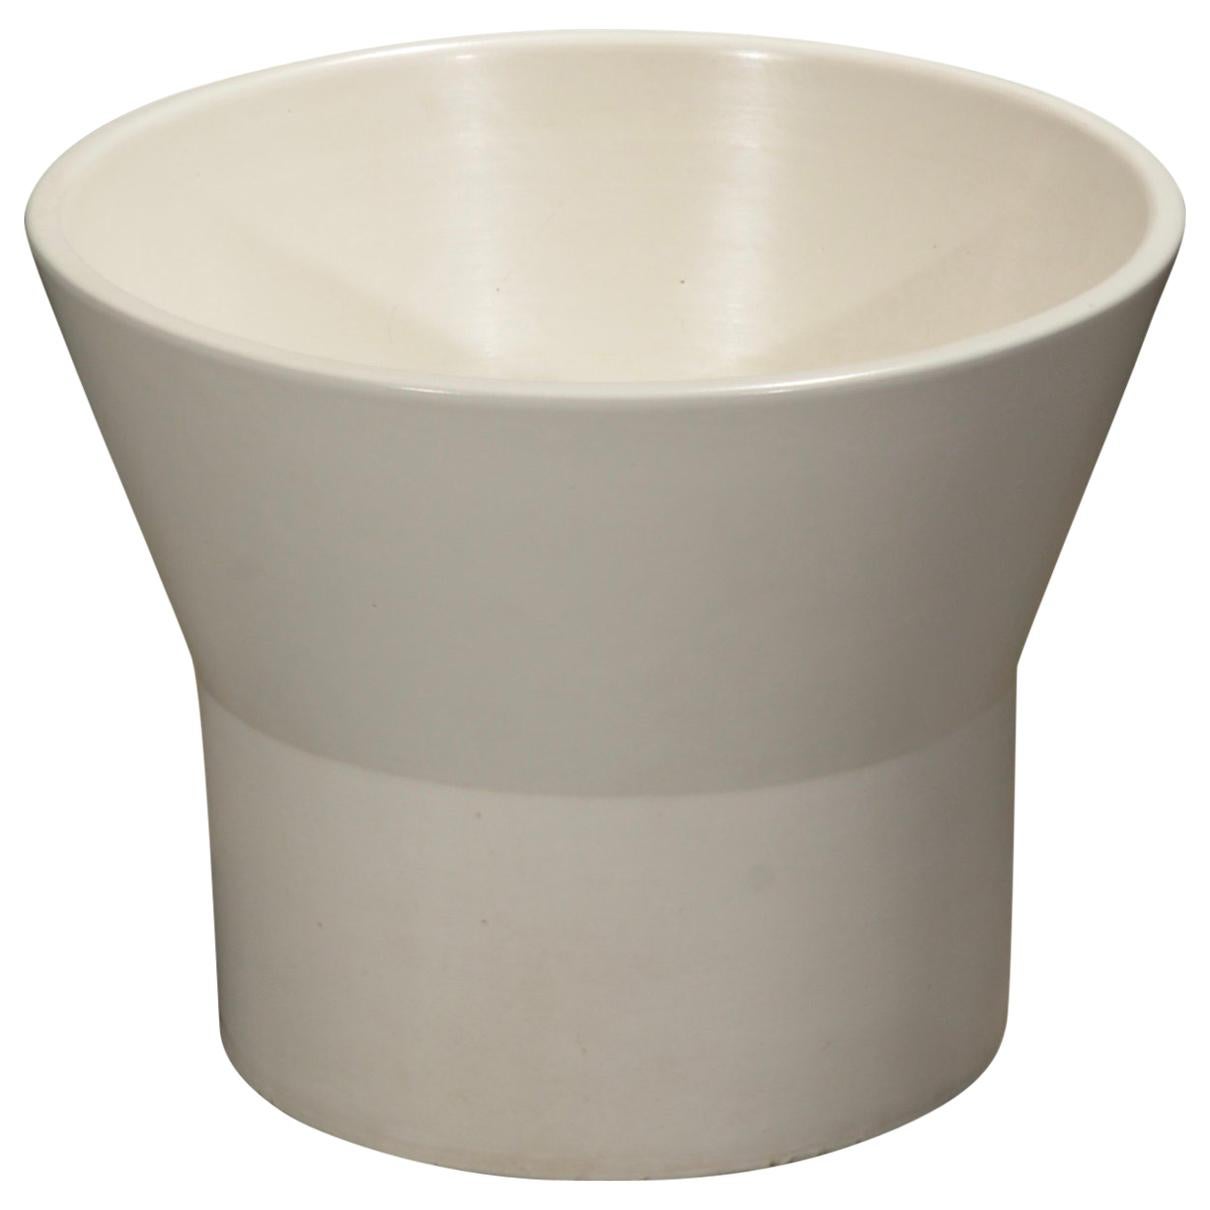 Paul Mccobb for Architectural Pottery White M-2 Planter, 1964 For Sale